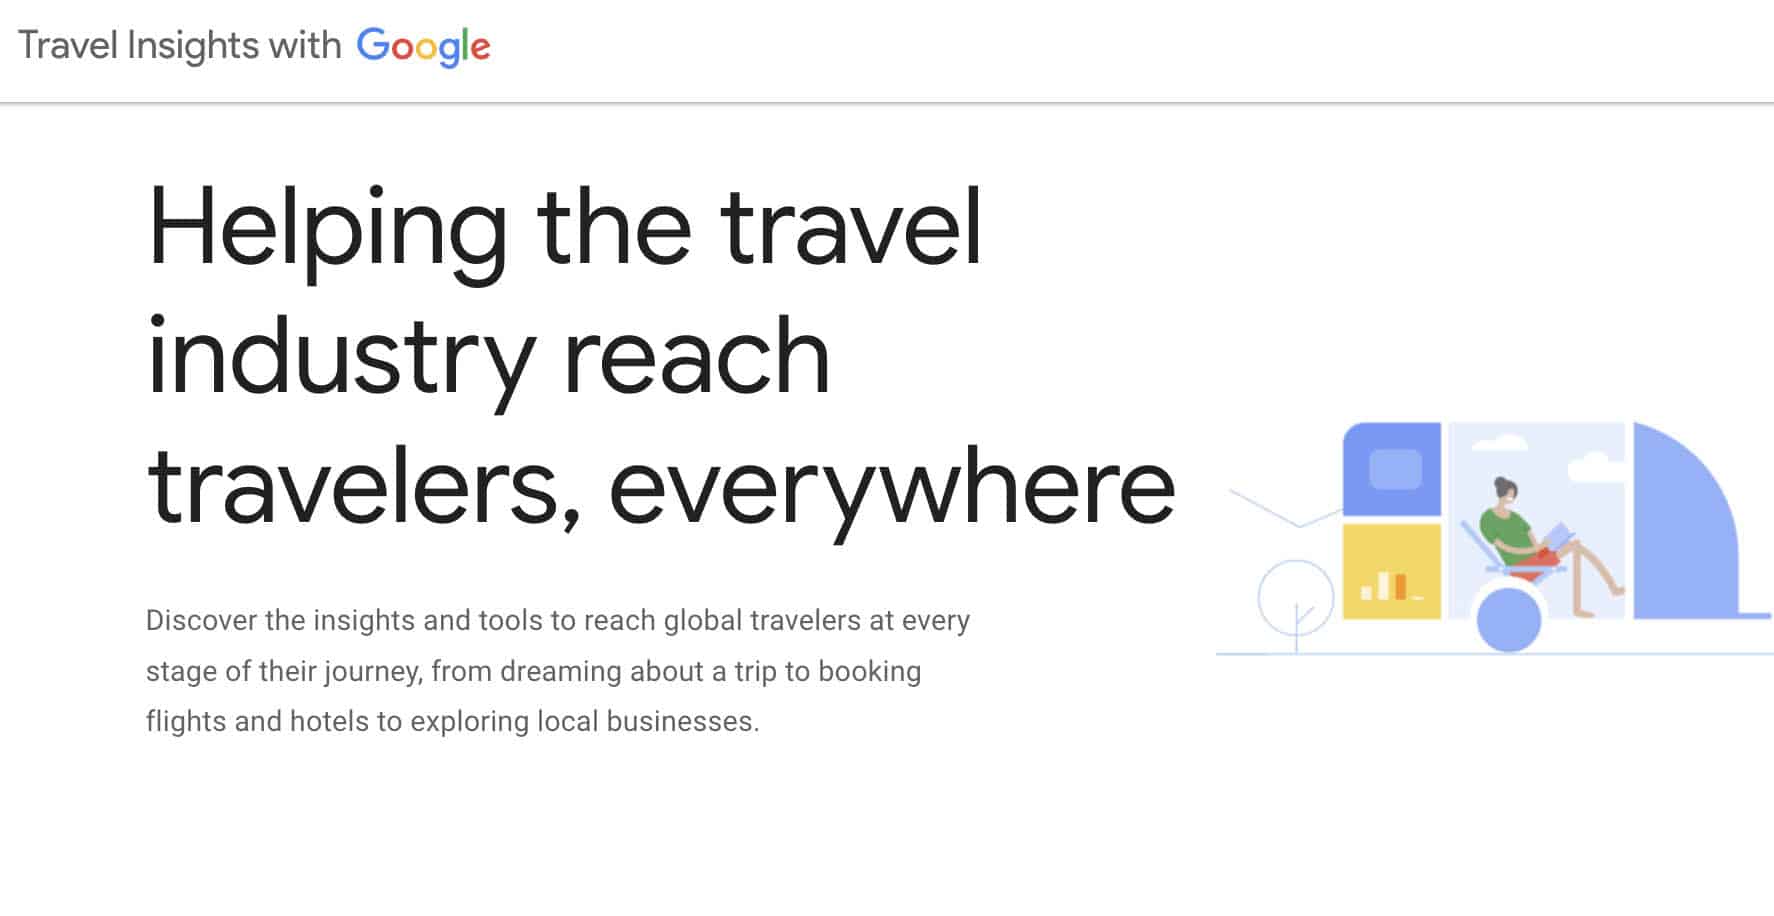 Travel information with Google